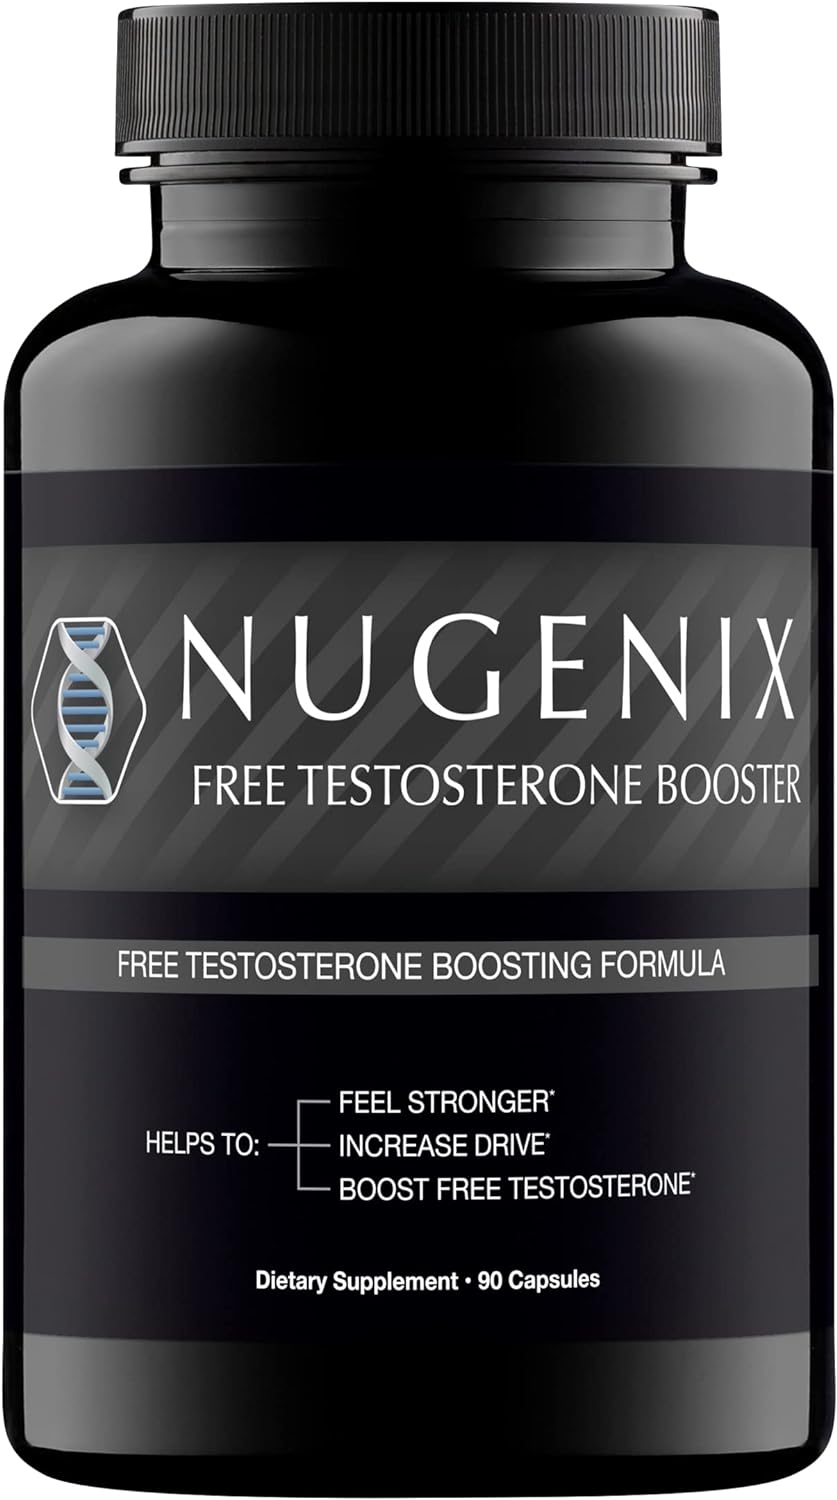 Nugenix Free Testosterone Booster Supplement for Men, 90 Count